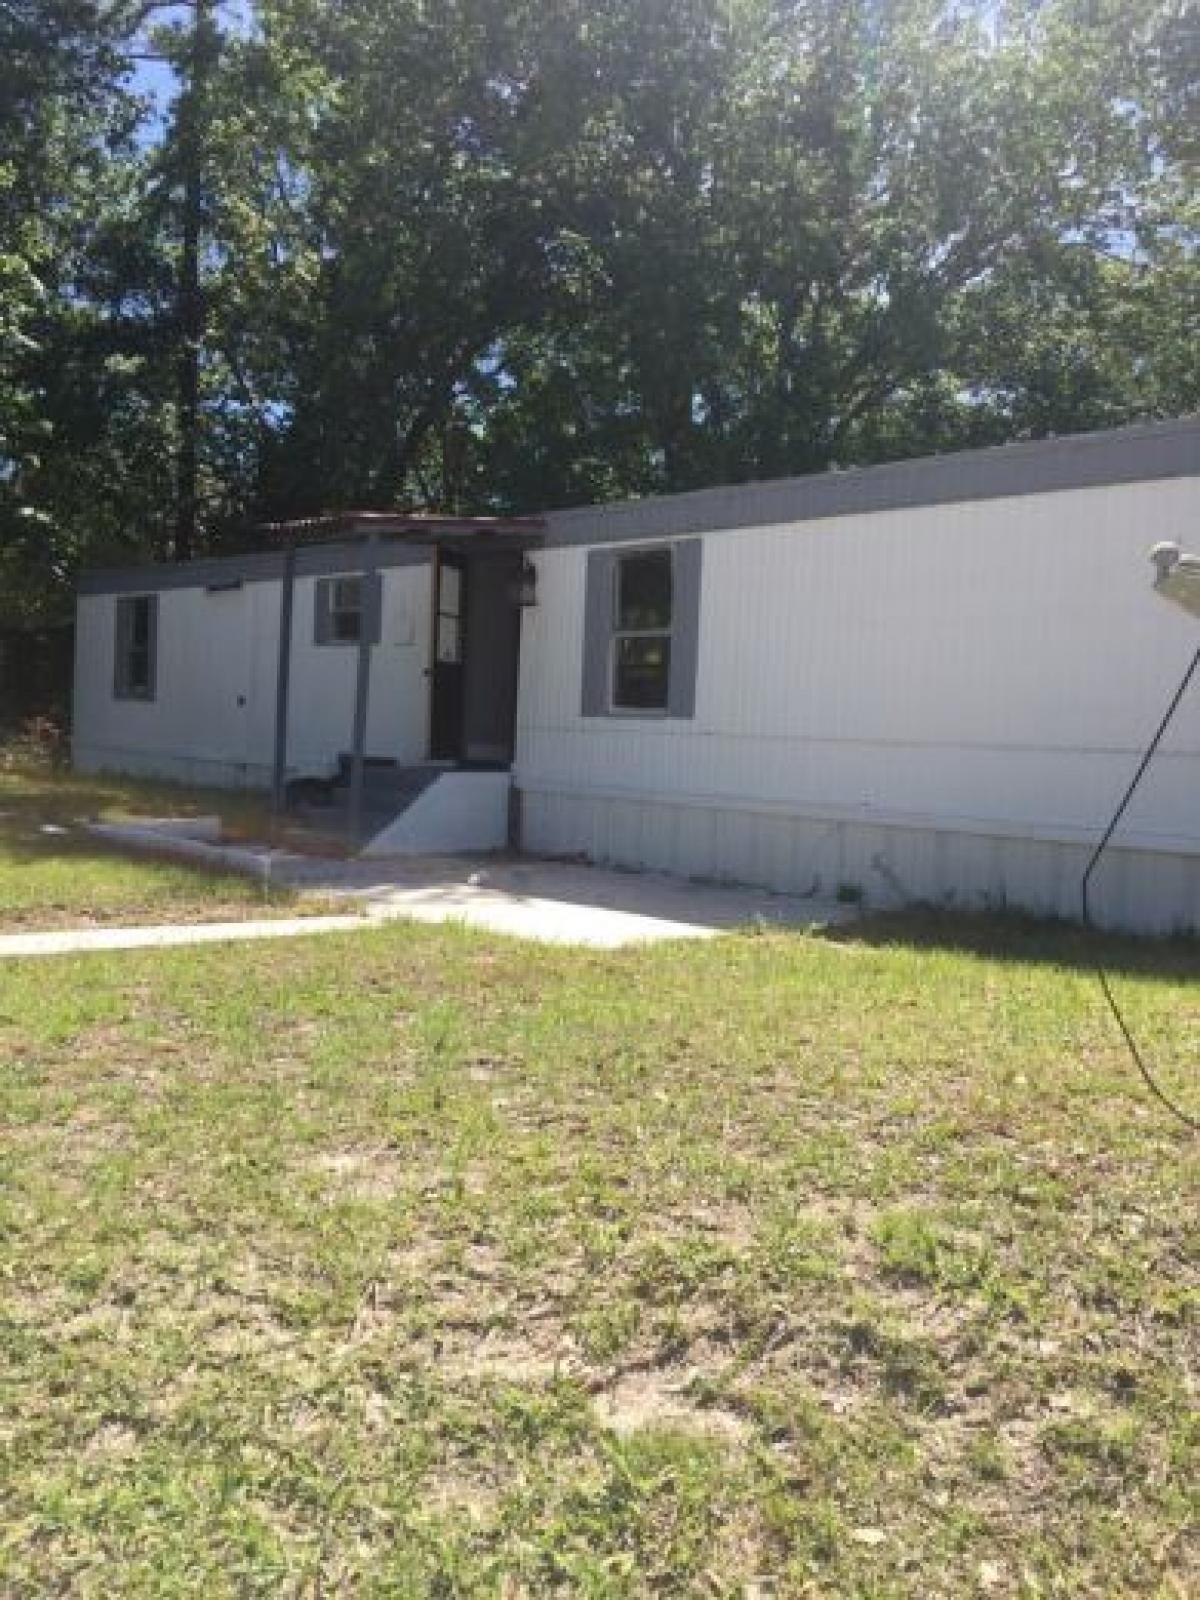 Picture of Mobile Home For Sale in Jacksonville, Florida, United States